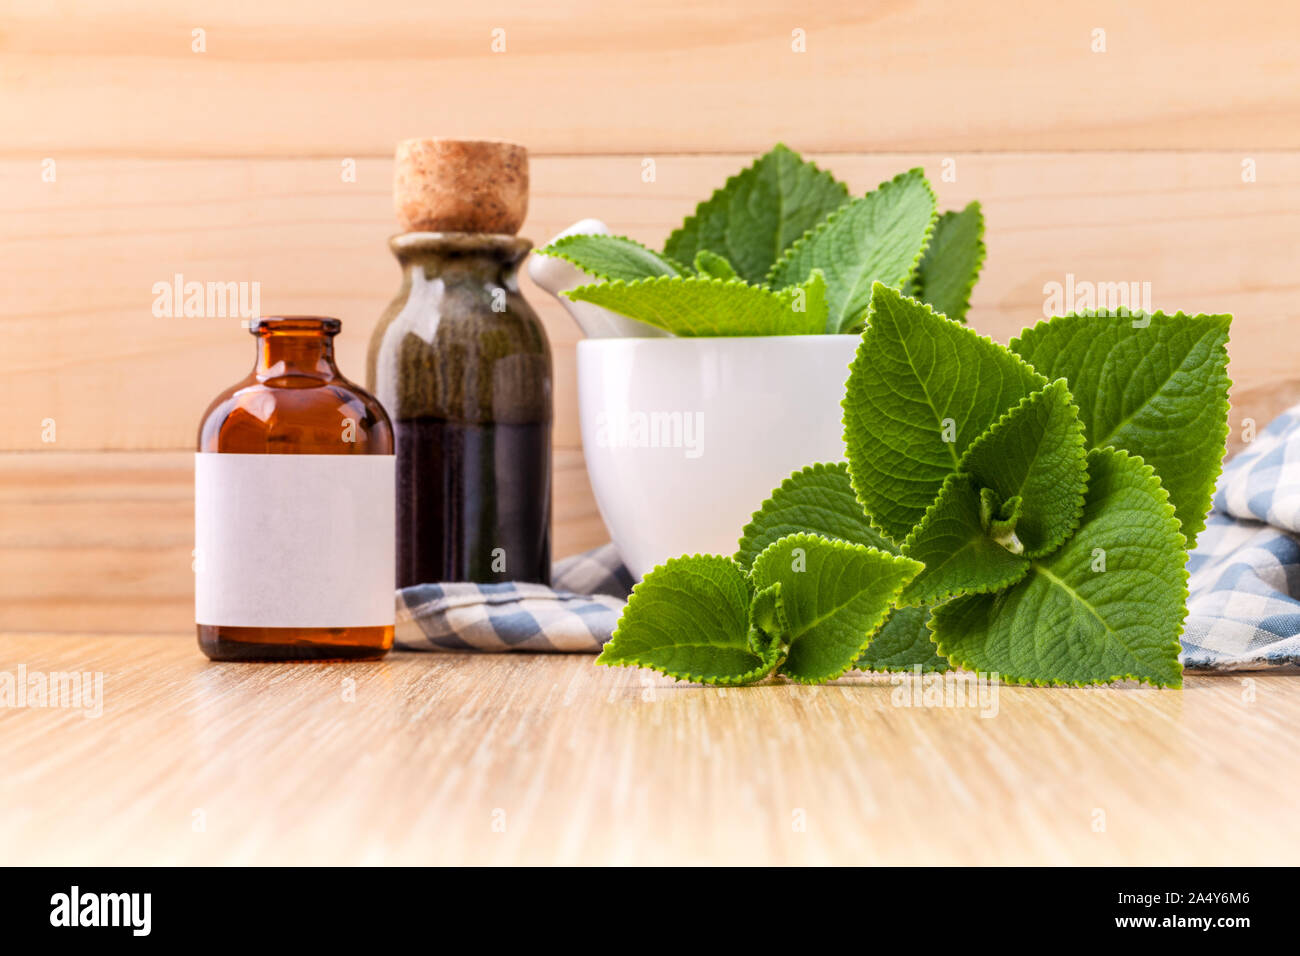 Country Borage,Indian Borage,Coleus amboinicus Lour with white mortar and essential extract oil on wooden background. Stock Photo